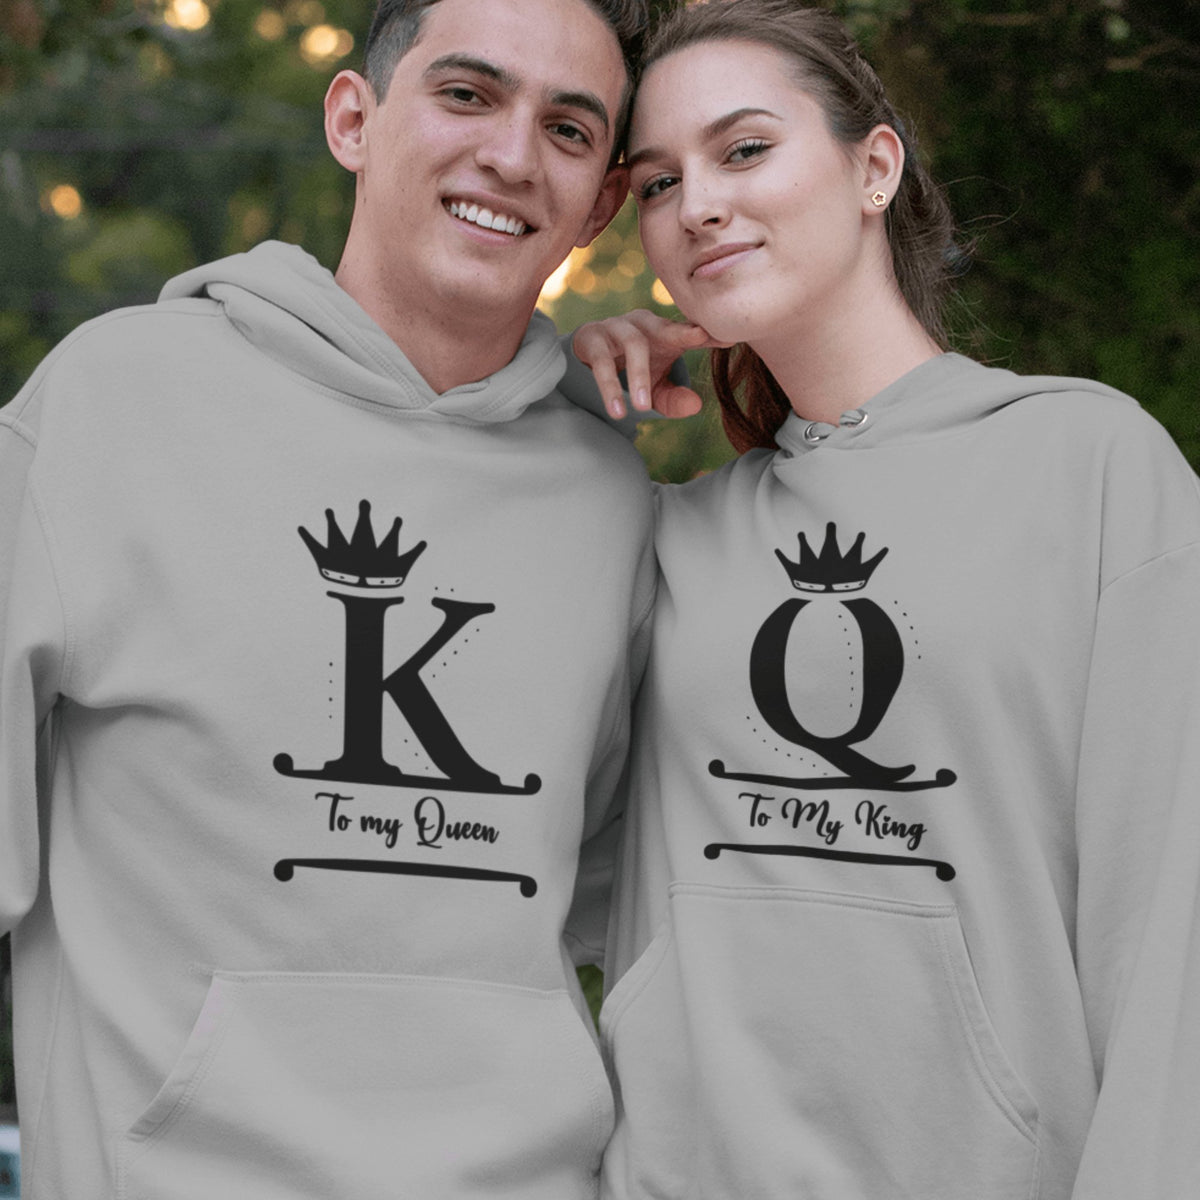 King To My Queen Couples Hoodie - Eventwisecreations